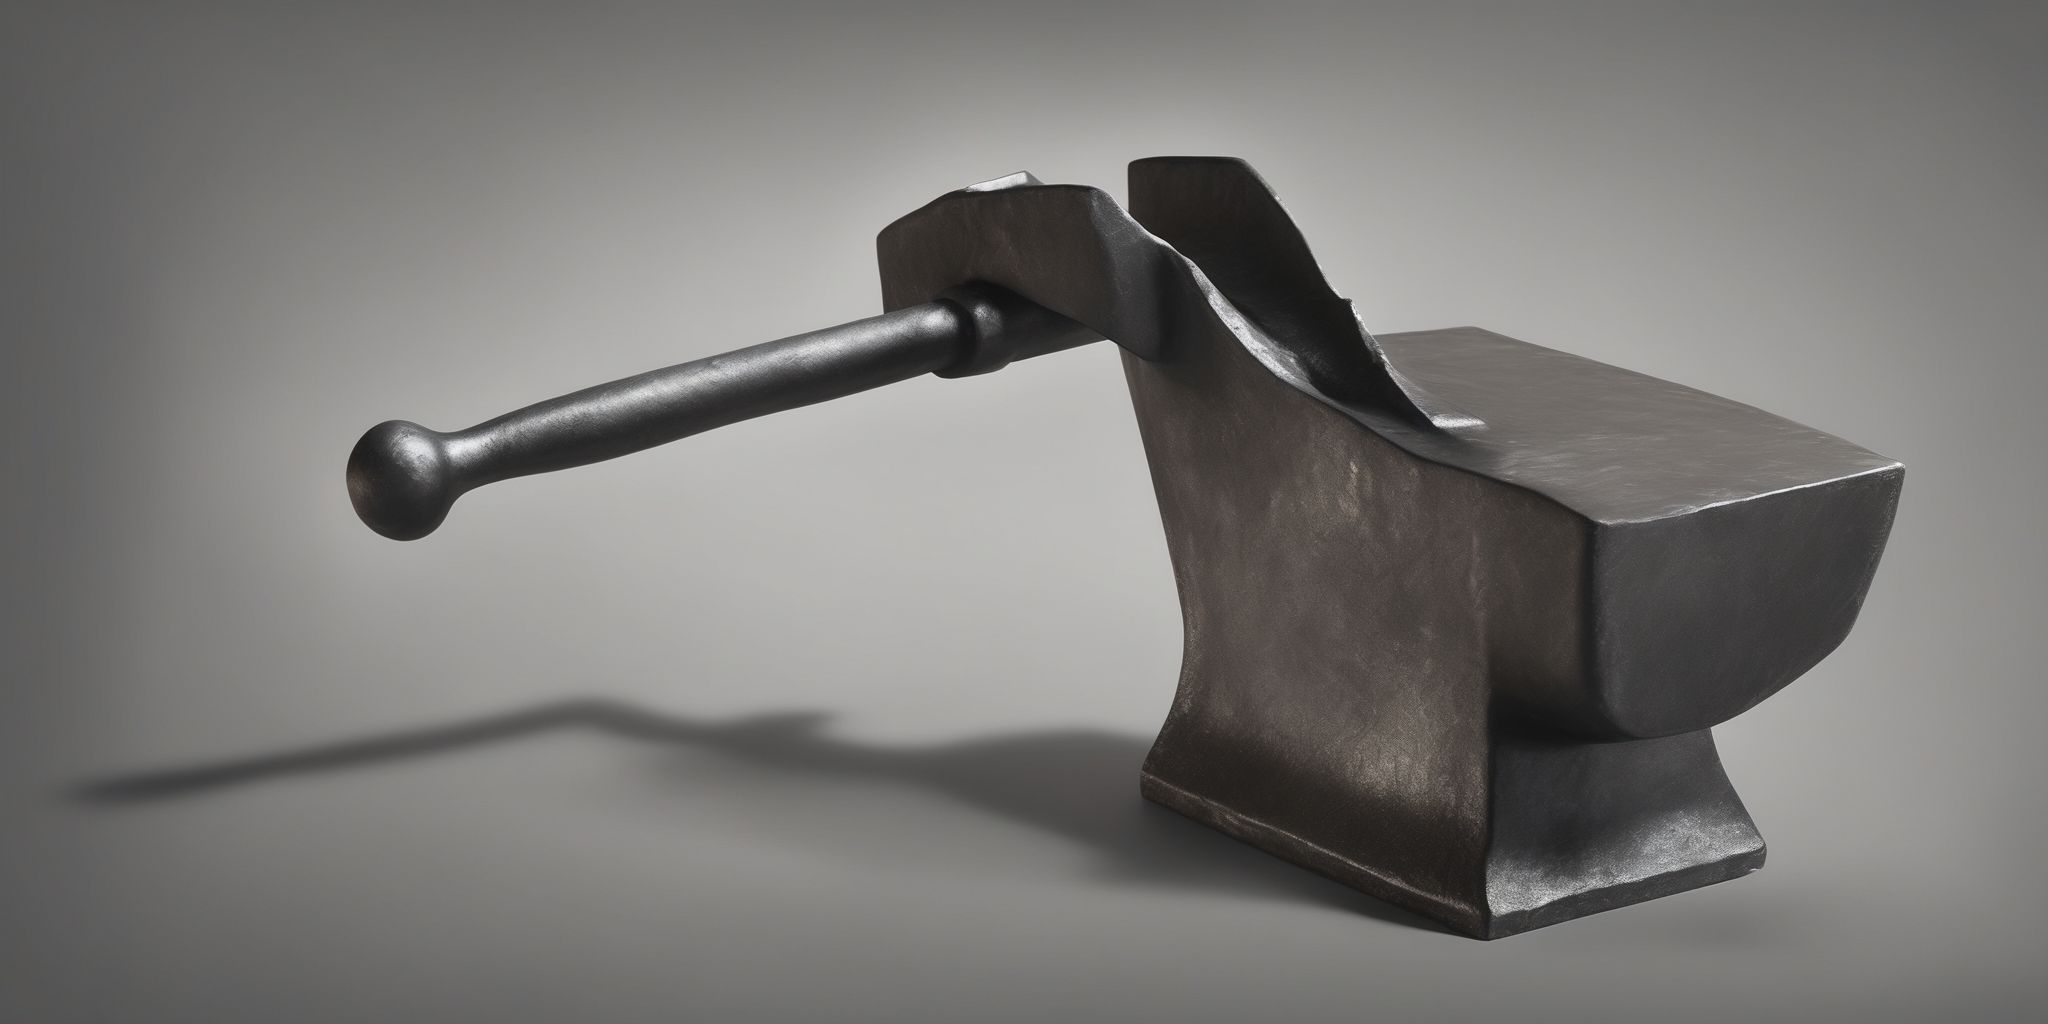 Anvil  in realistic, photographic style